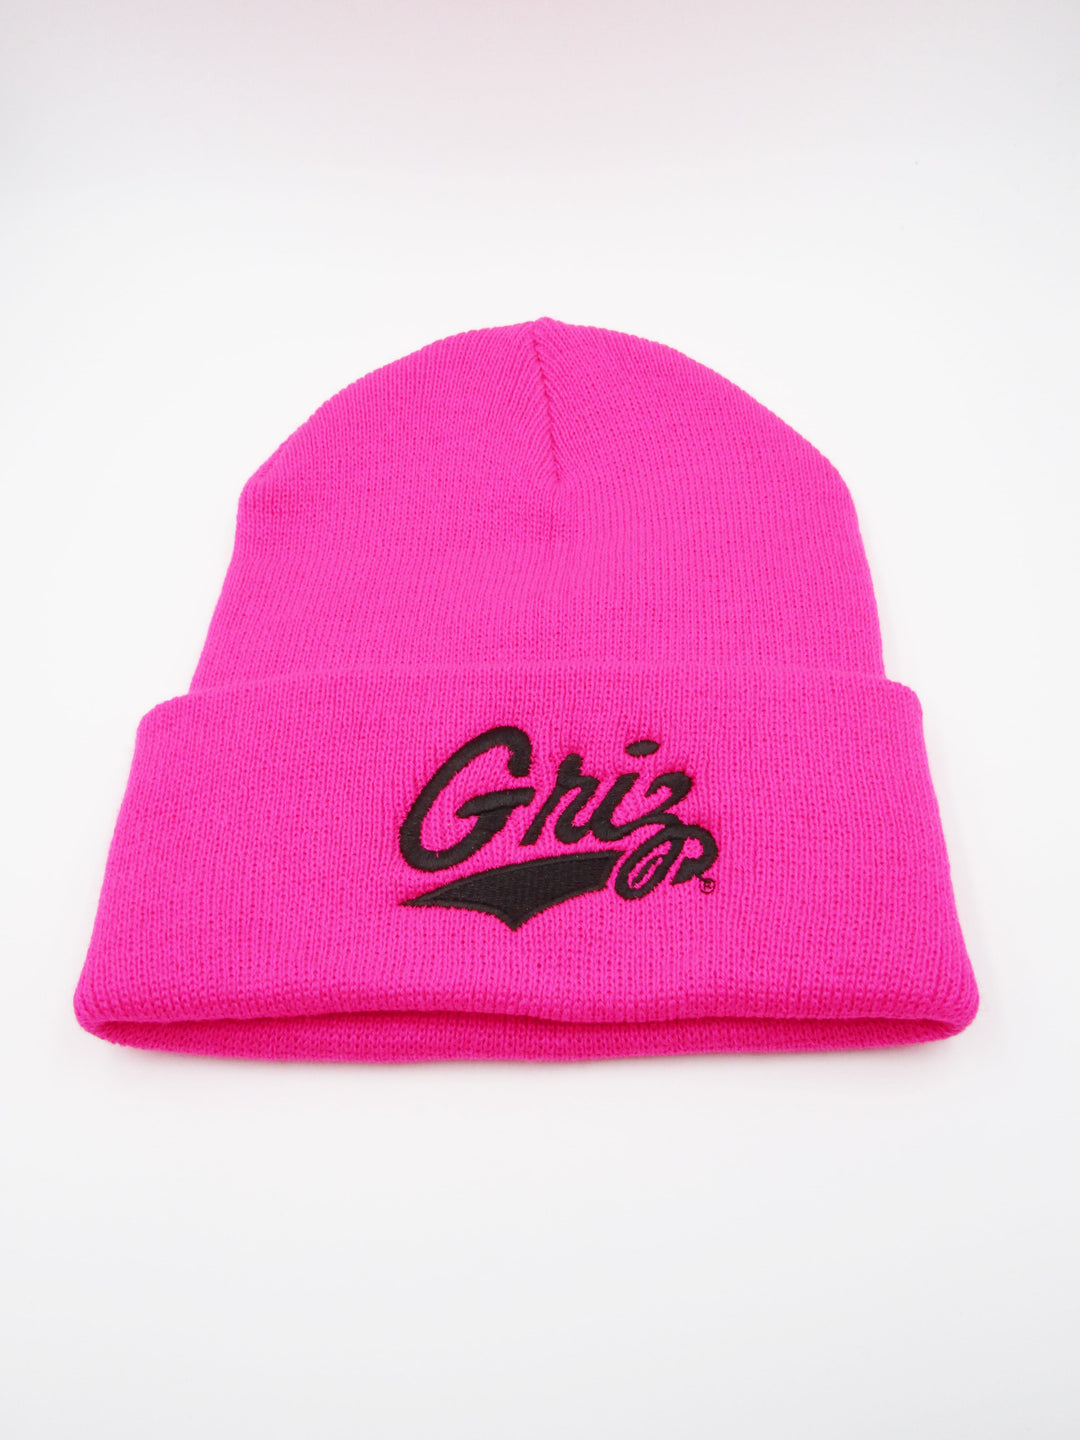 Blue Peaks Creative's pink Knit Beanie embroidered with the Griz Script design in maroon